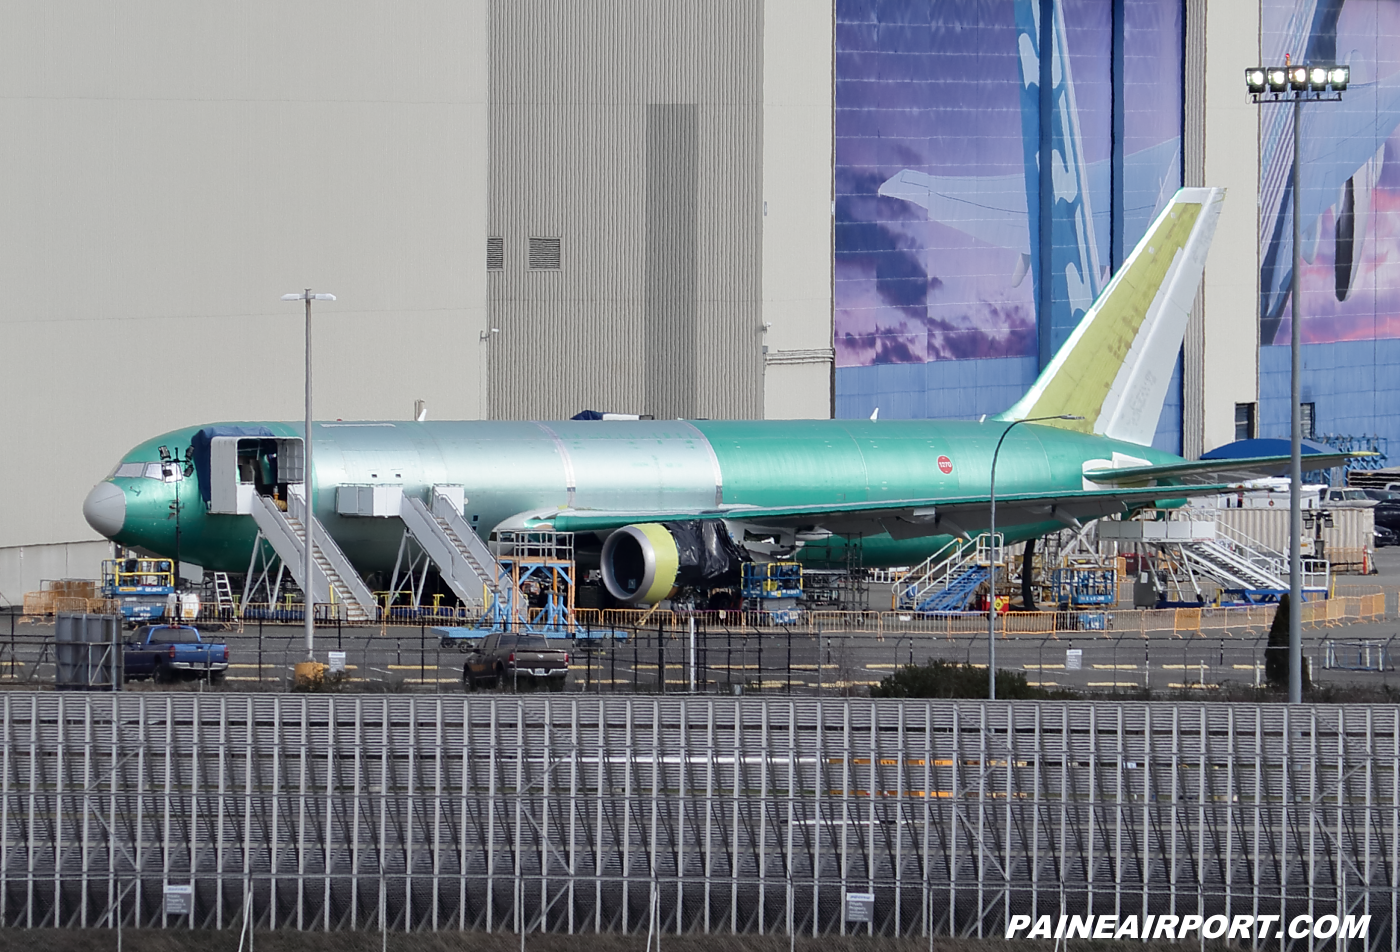 China Longhao Airlines 767 at KPAE Paine Field